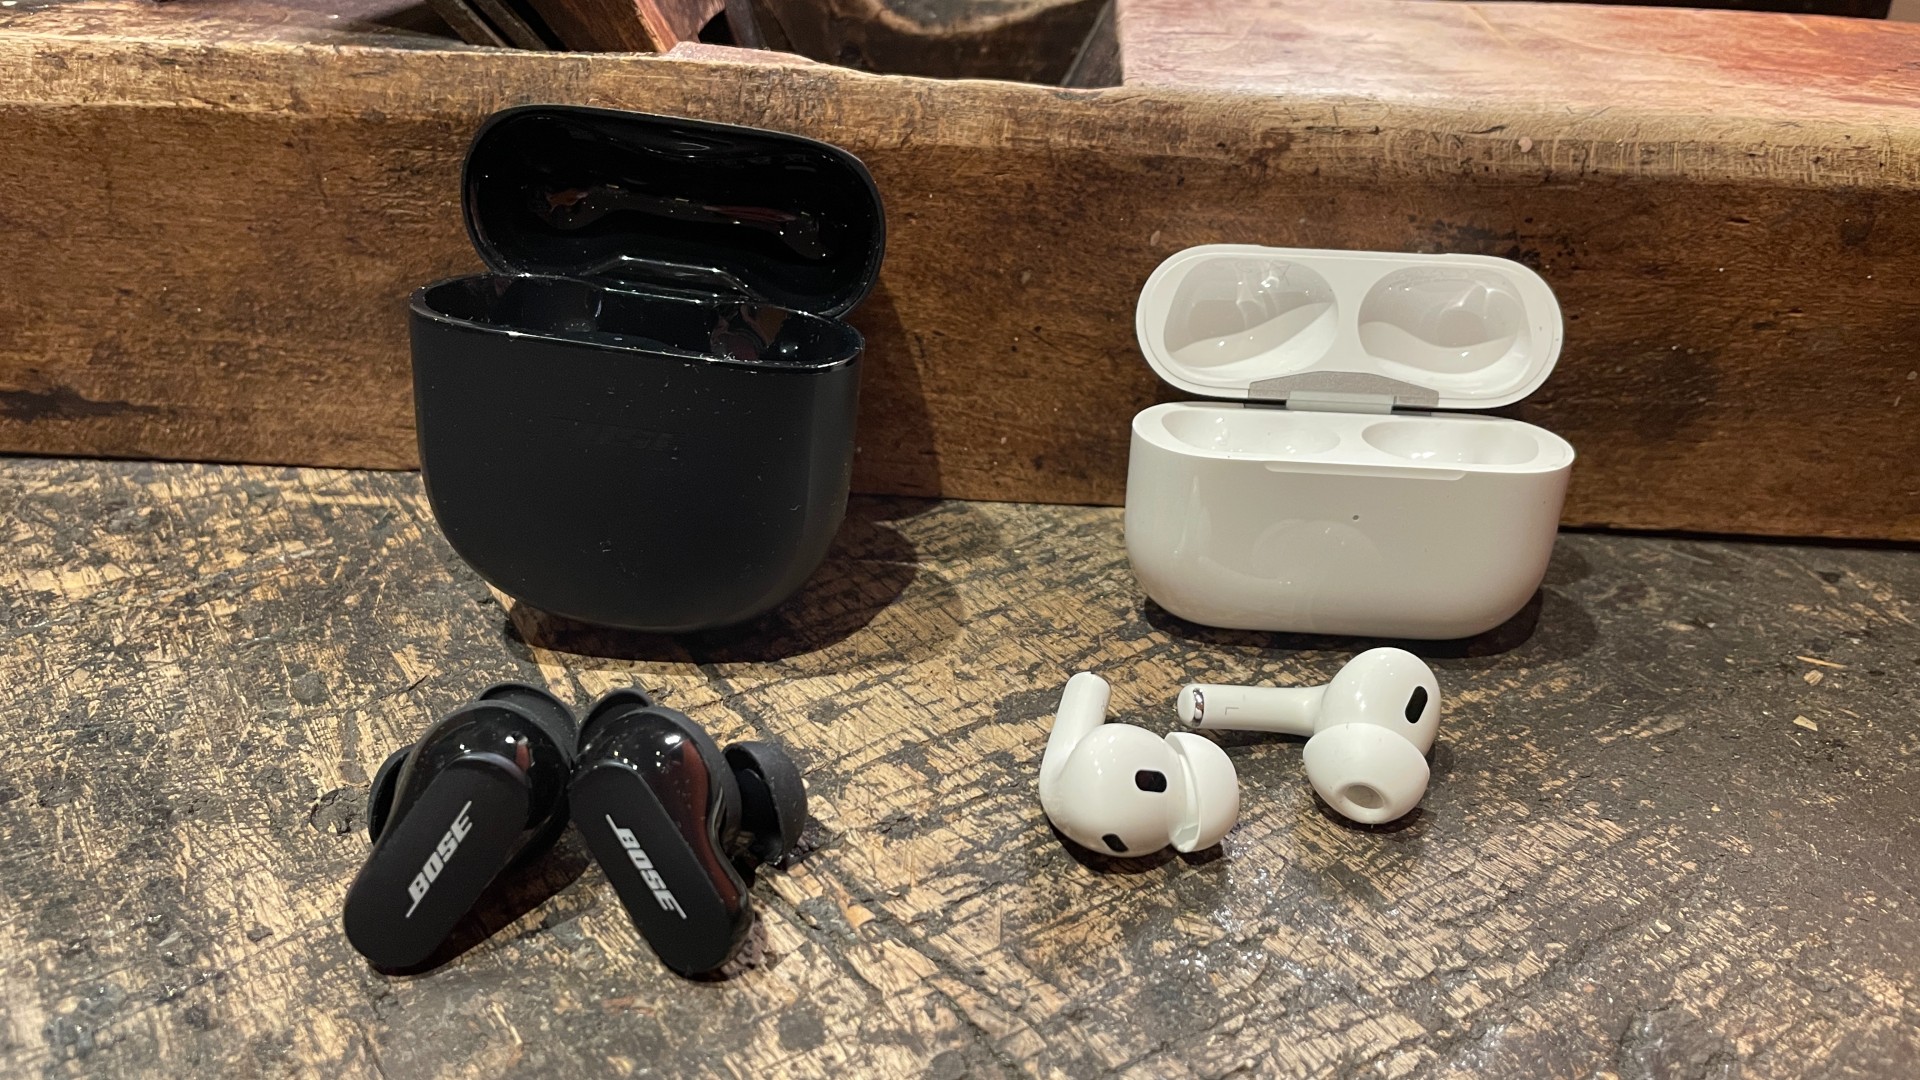 How these earbuds compare to AirPods